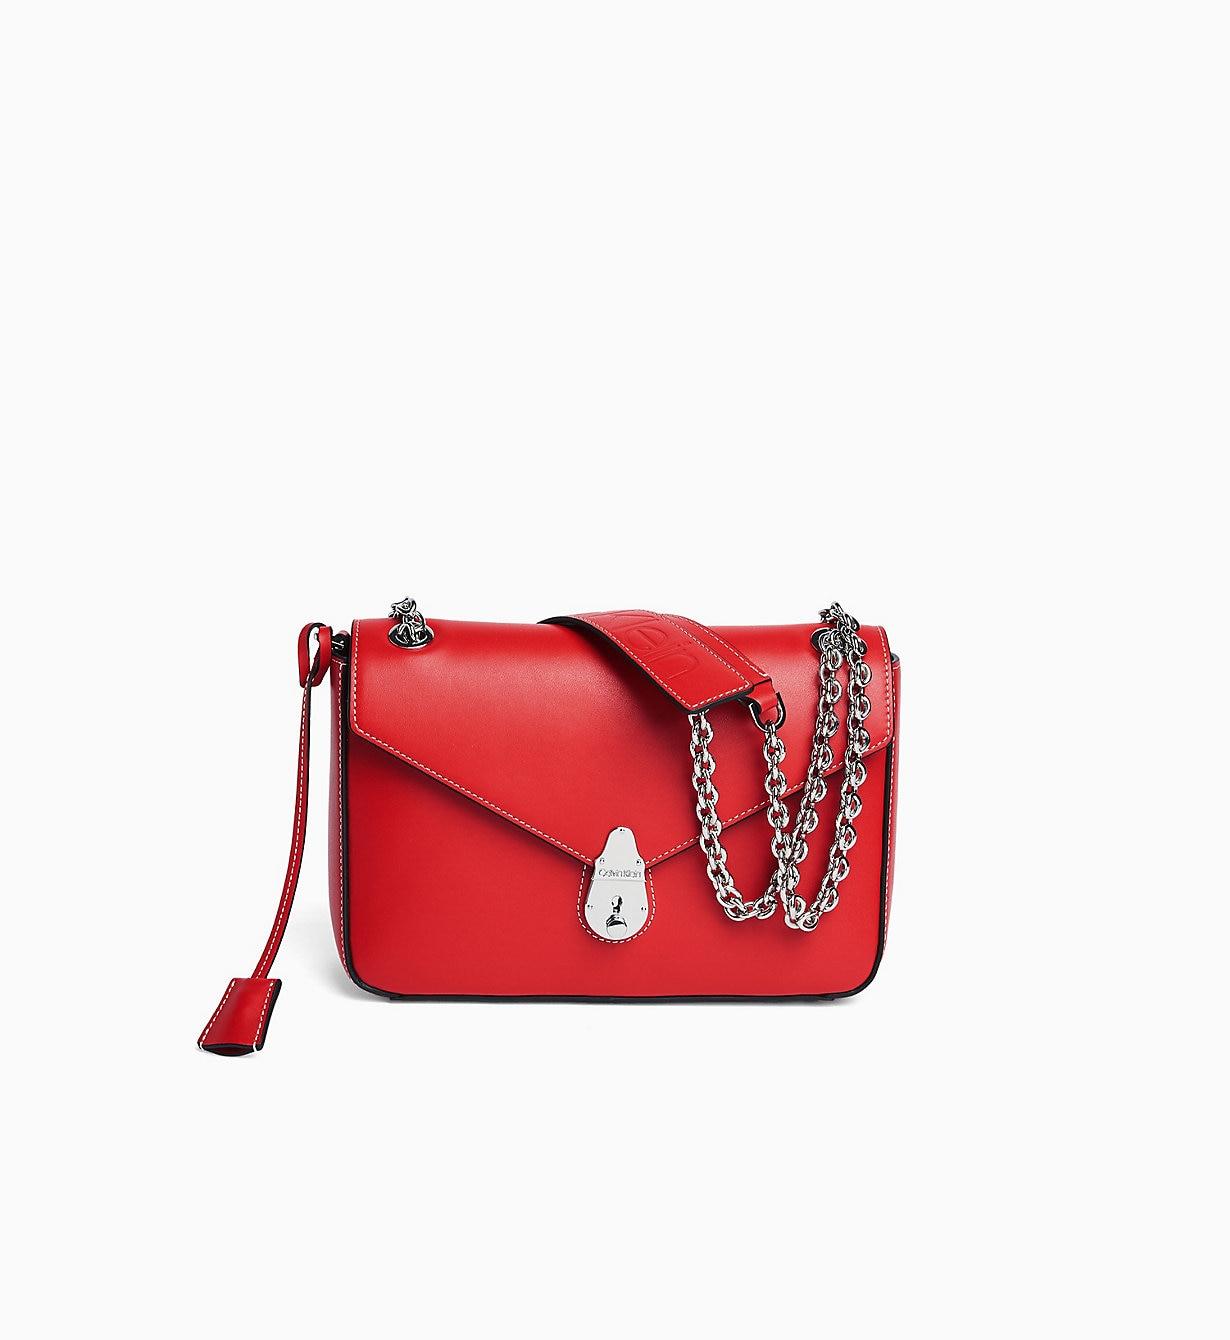 Calvin Klein Lock Convertible Leather Shoulder Bag in Red - Lyst